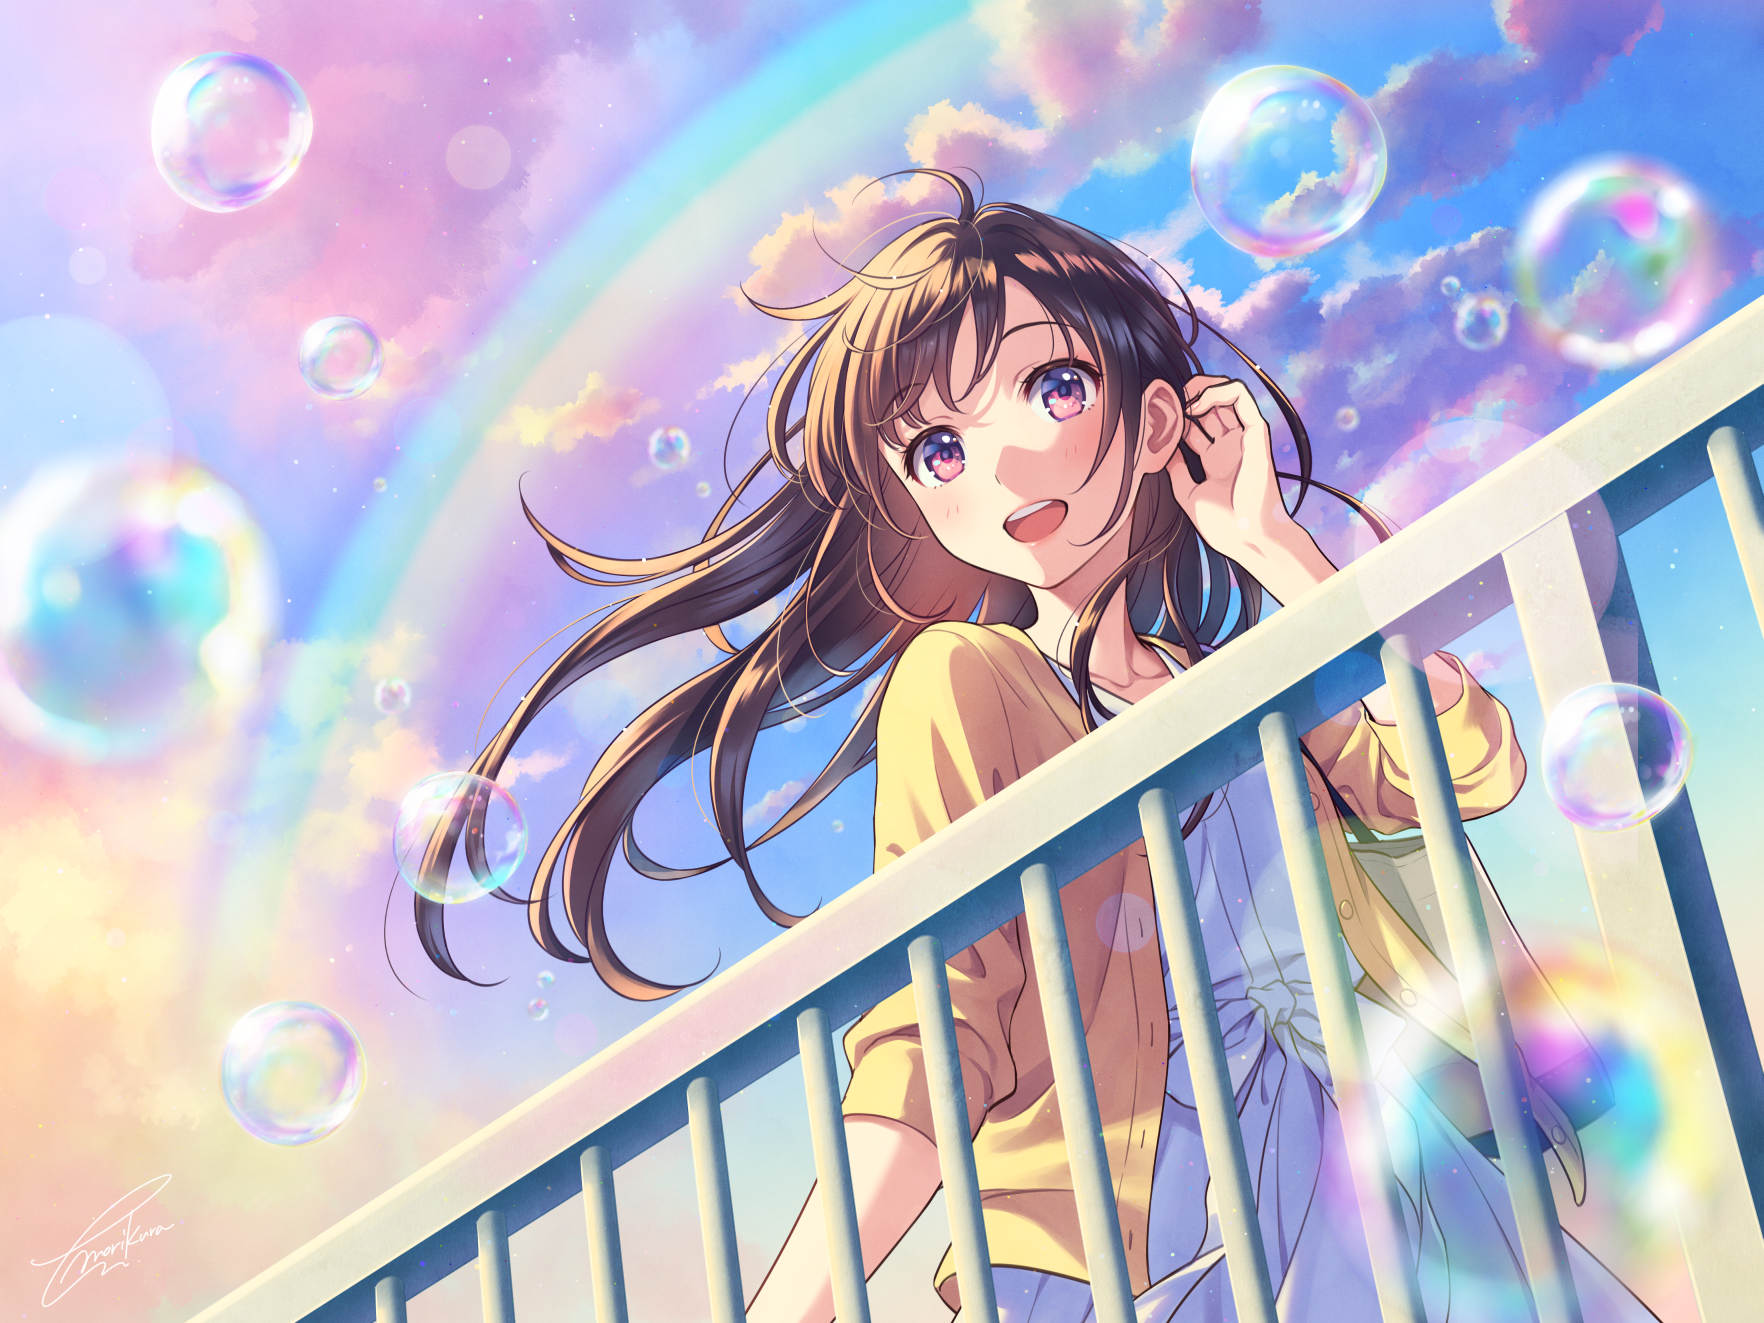 Anime Girls Bubbles Rainbows Clouds Smiling Anime Artwork 1764x1323